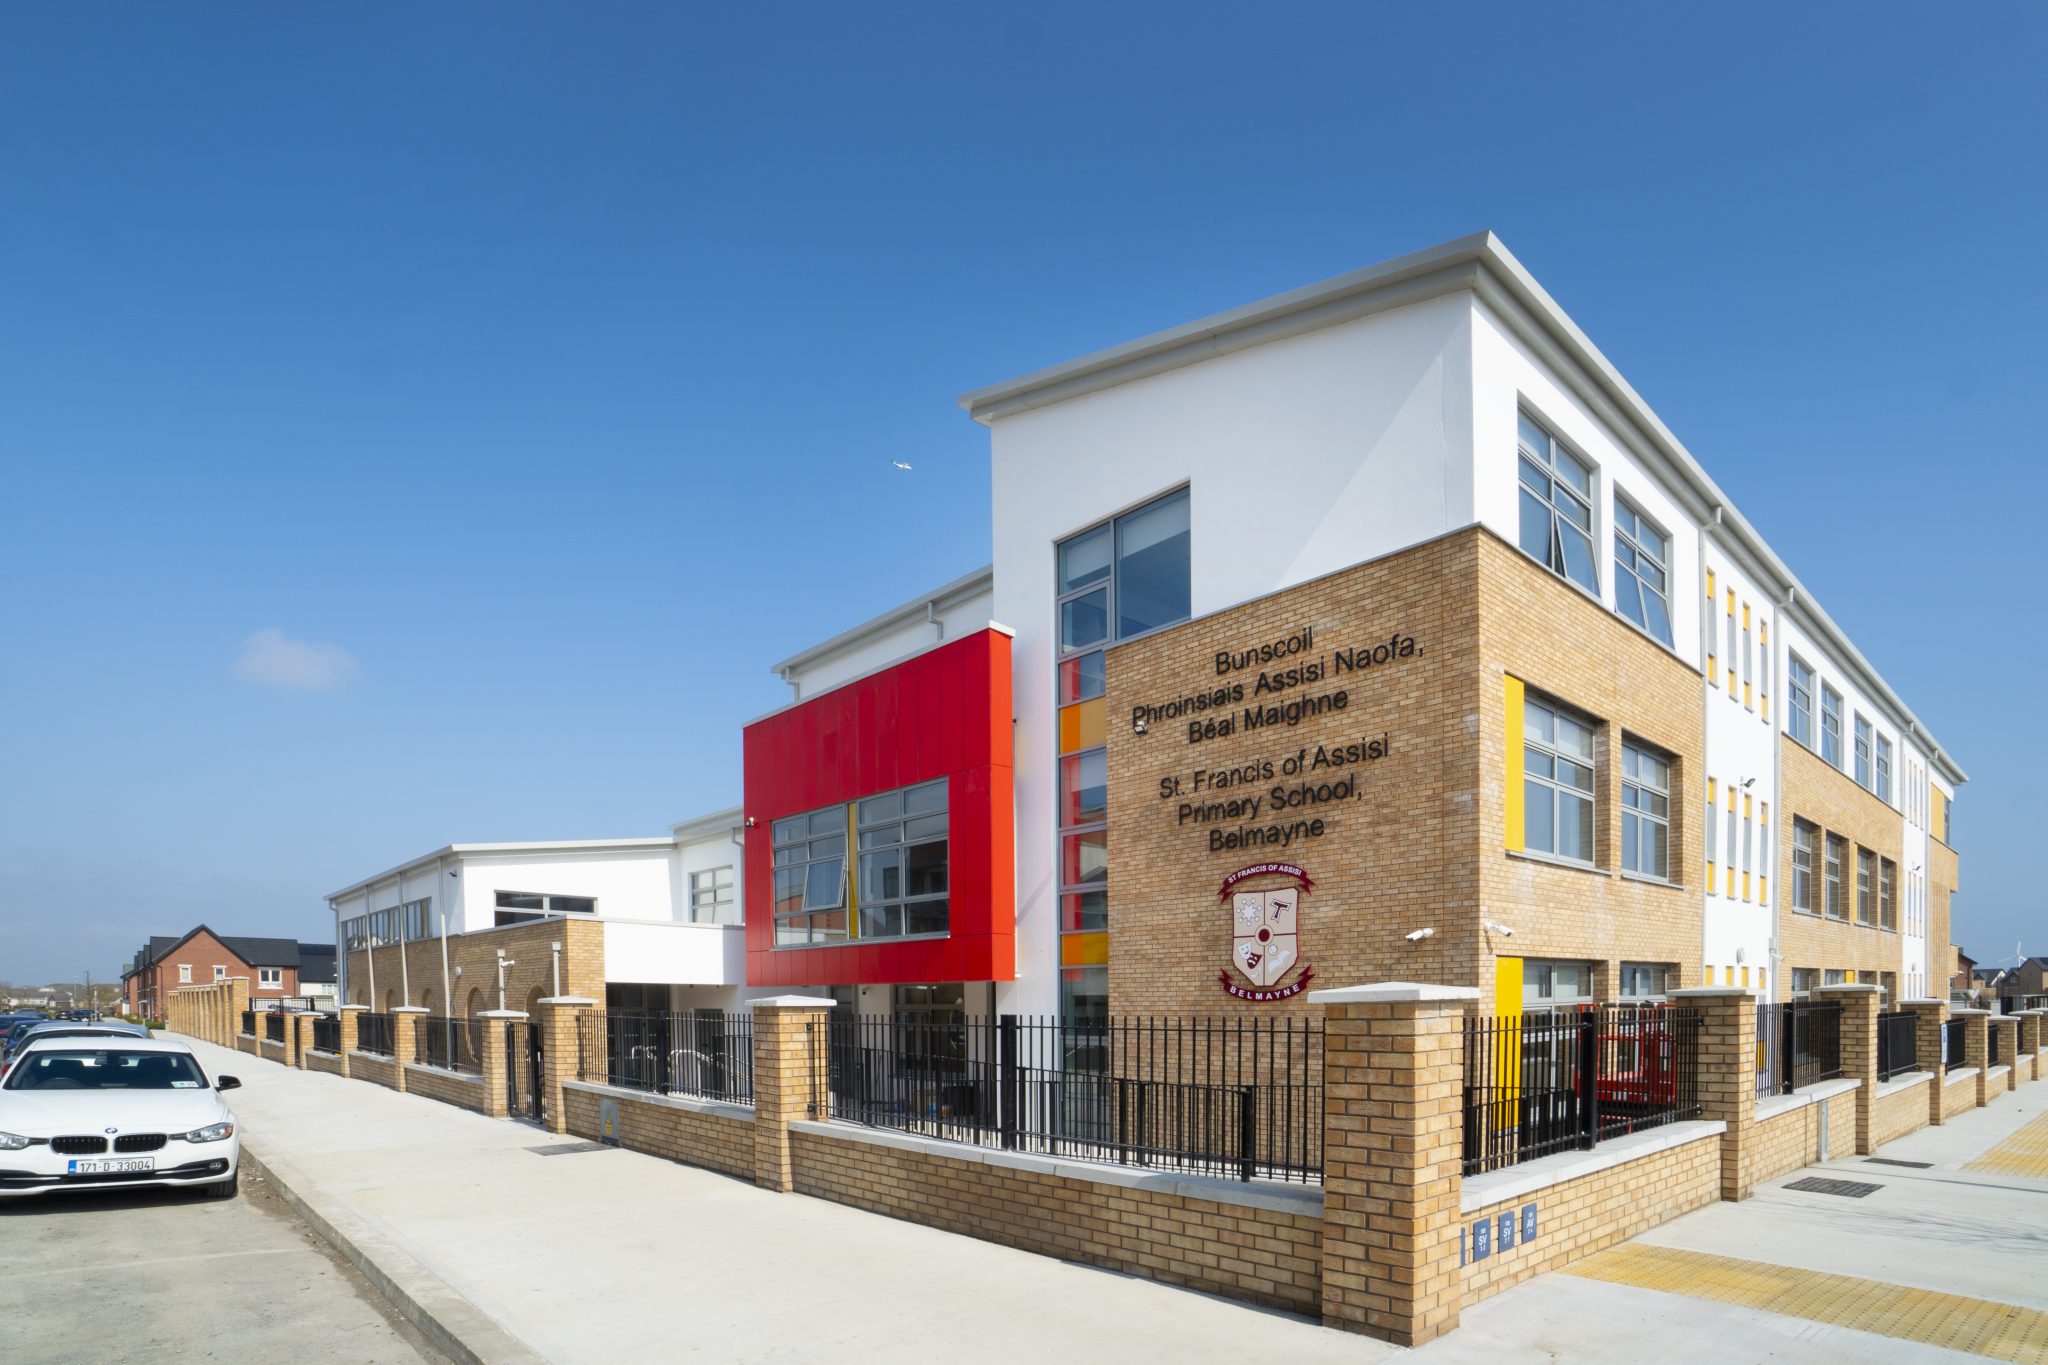 Completion of Belmayne Educate Together National School and St. Francis of Assisi national school, Dublin